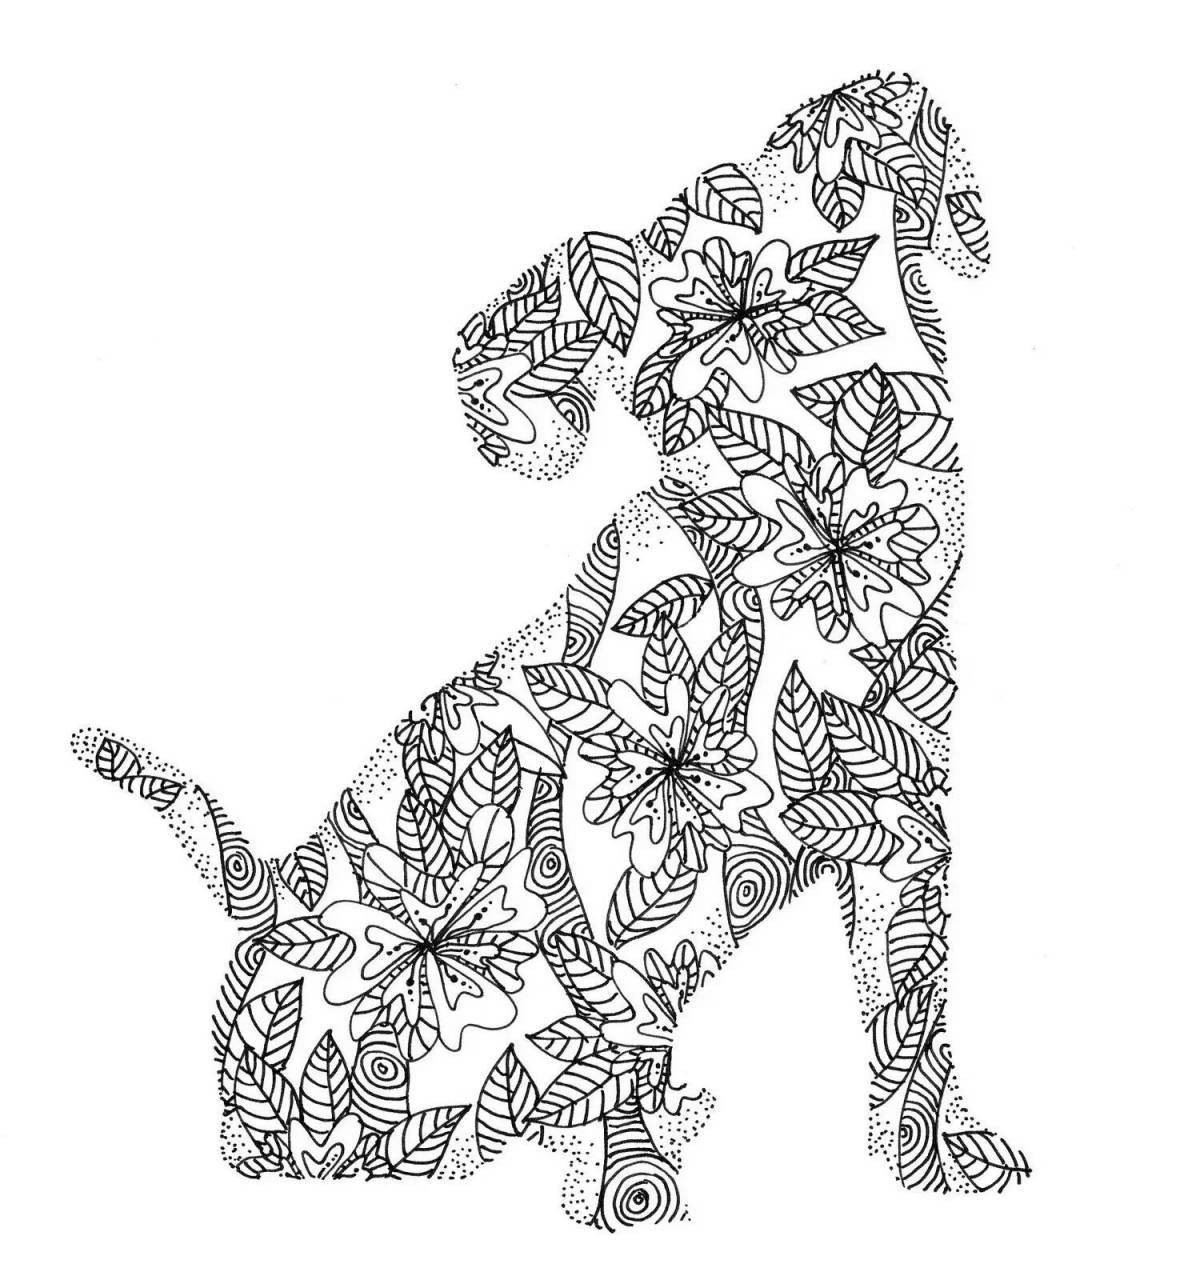 Jack Russell coloring page